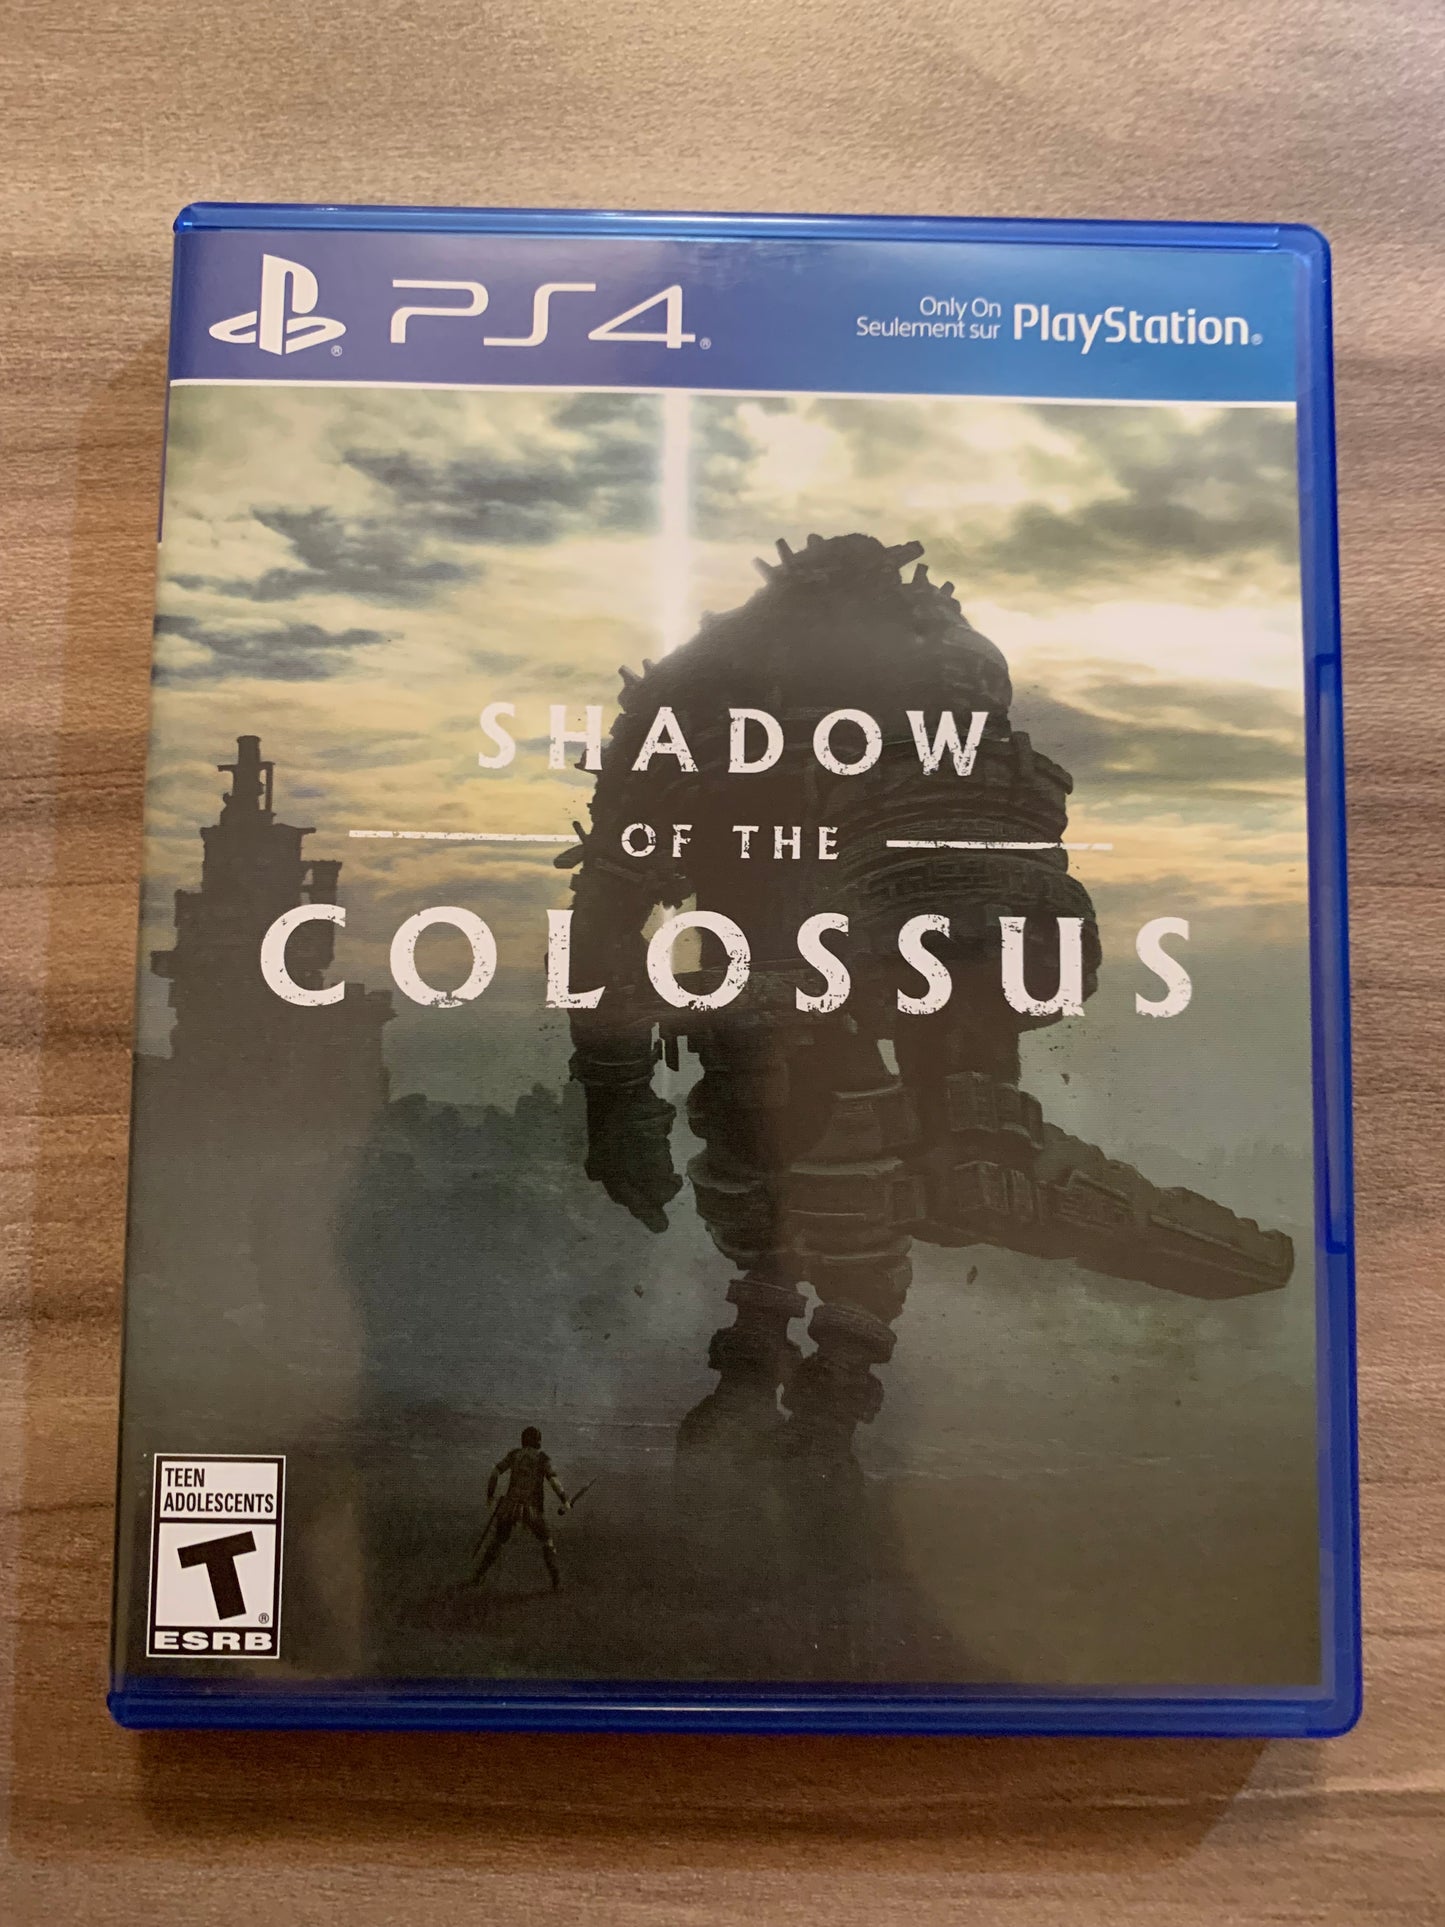 SONY PLAYSTATiON 4 [PS4] | SHADOW OF THE COLOSSUS